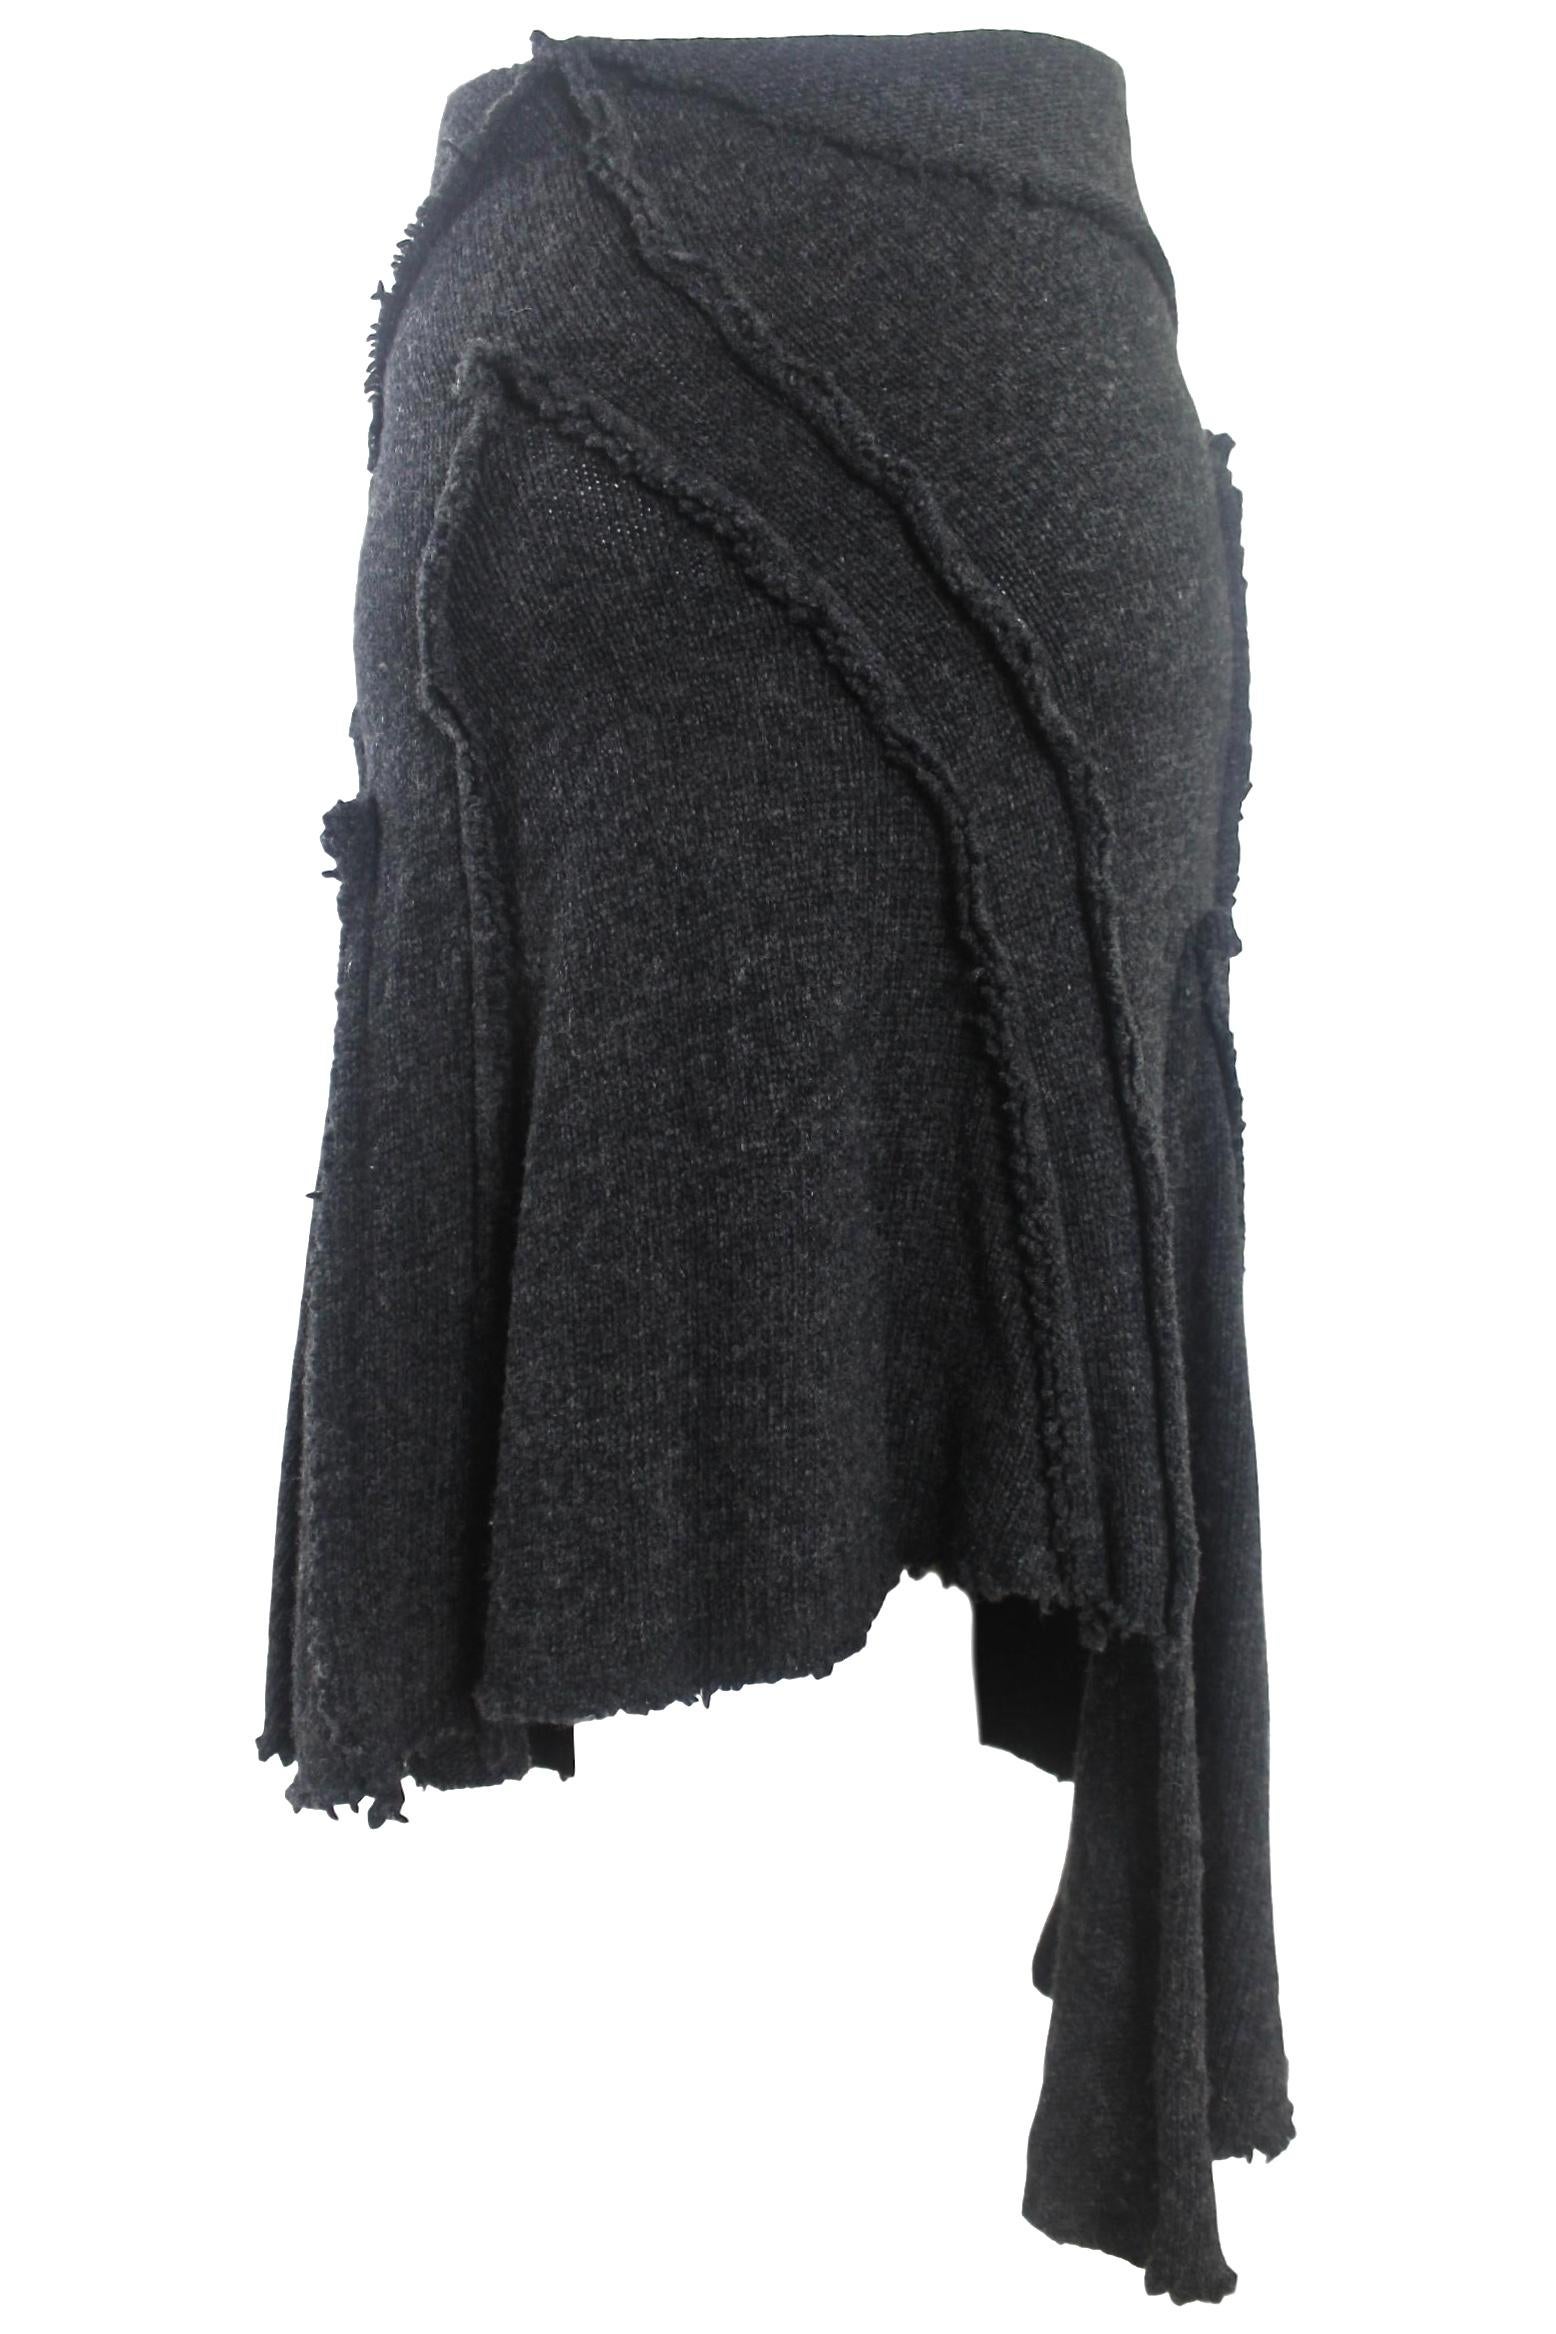 Women's Come des Garcons 2002 Collection Wool Knit Skirt For Sale